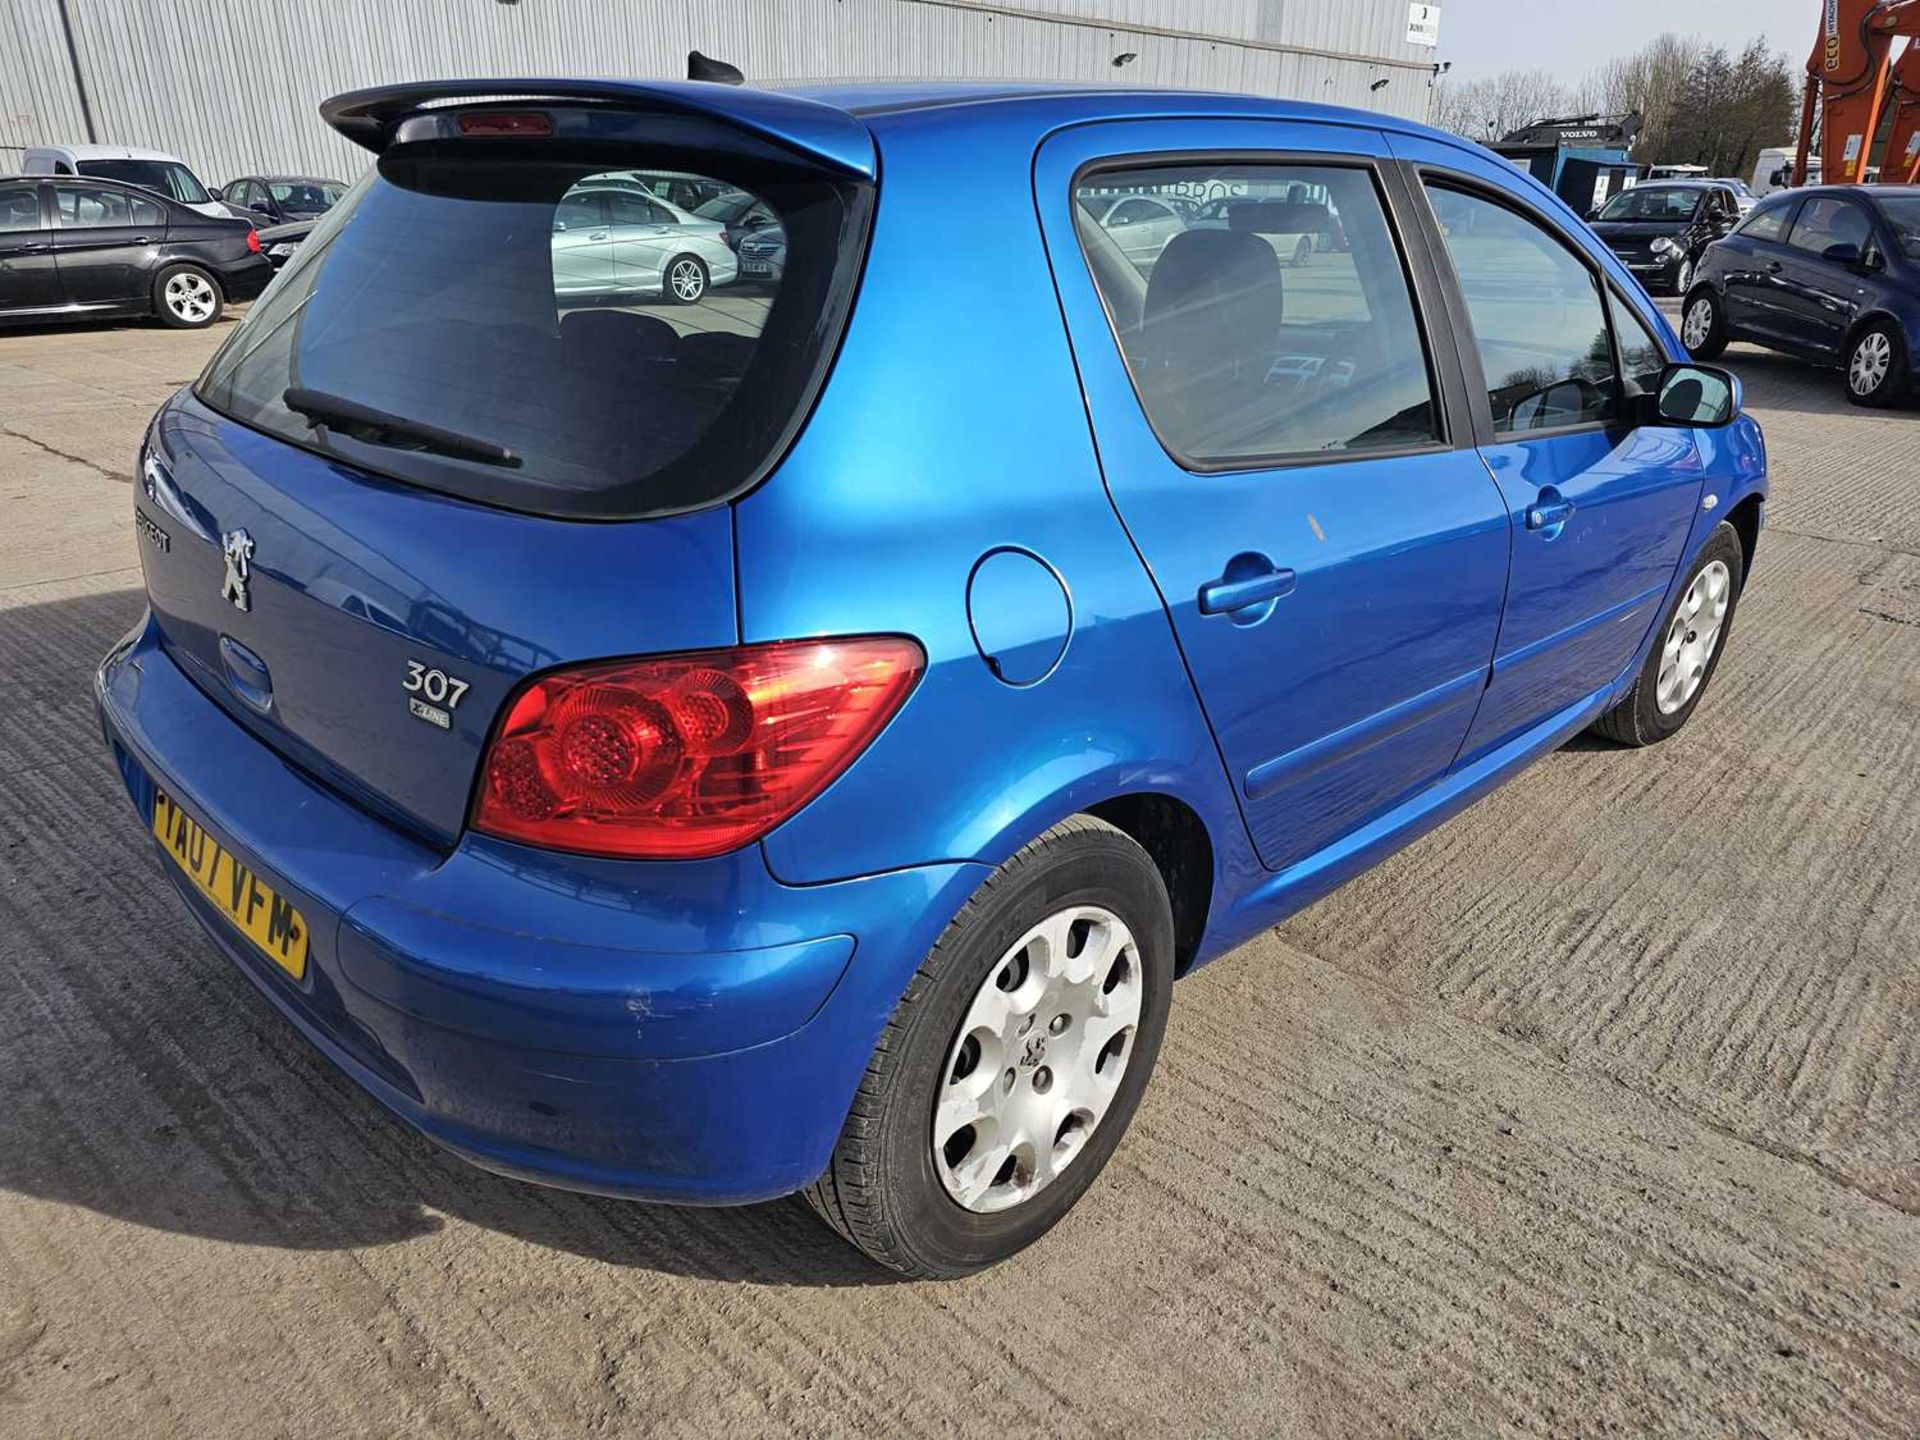 2007 Peugeot 307 X-line, 5 Speed, A/C (Reg. Docs. & Service History Available, Tested 07/24) - Image 35 of 56